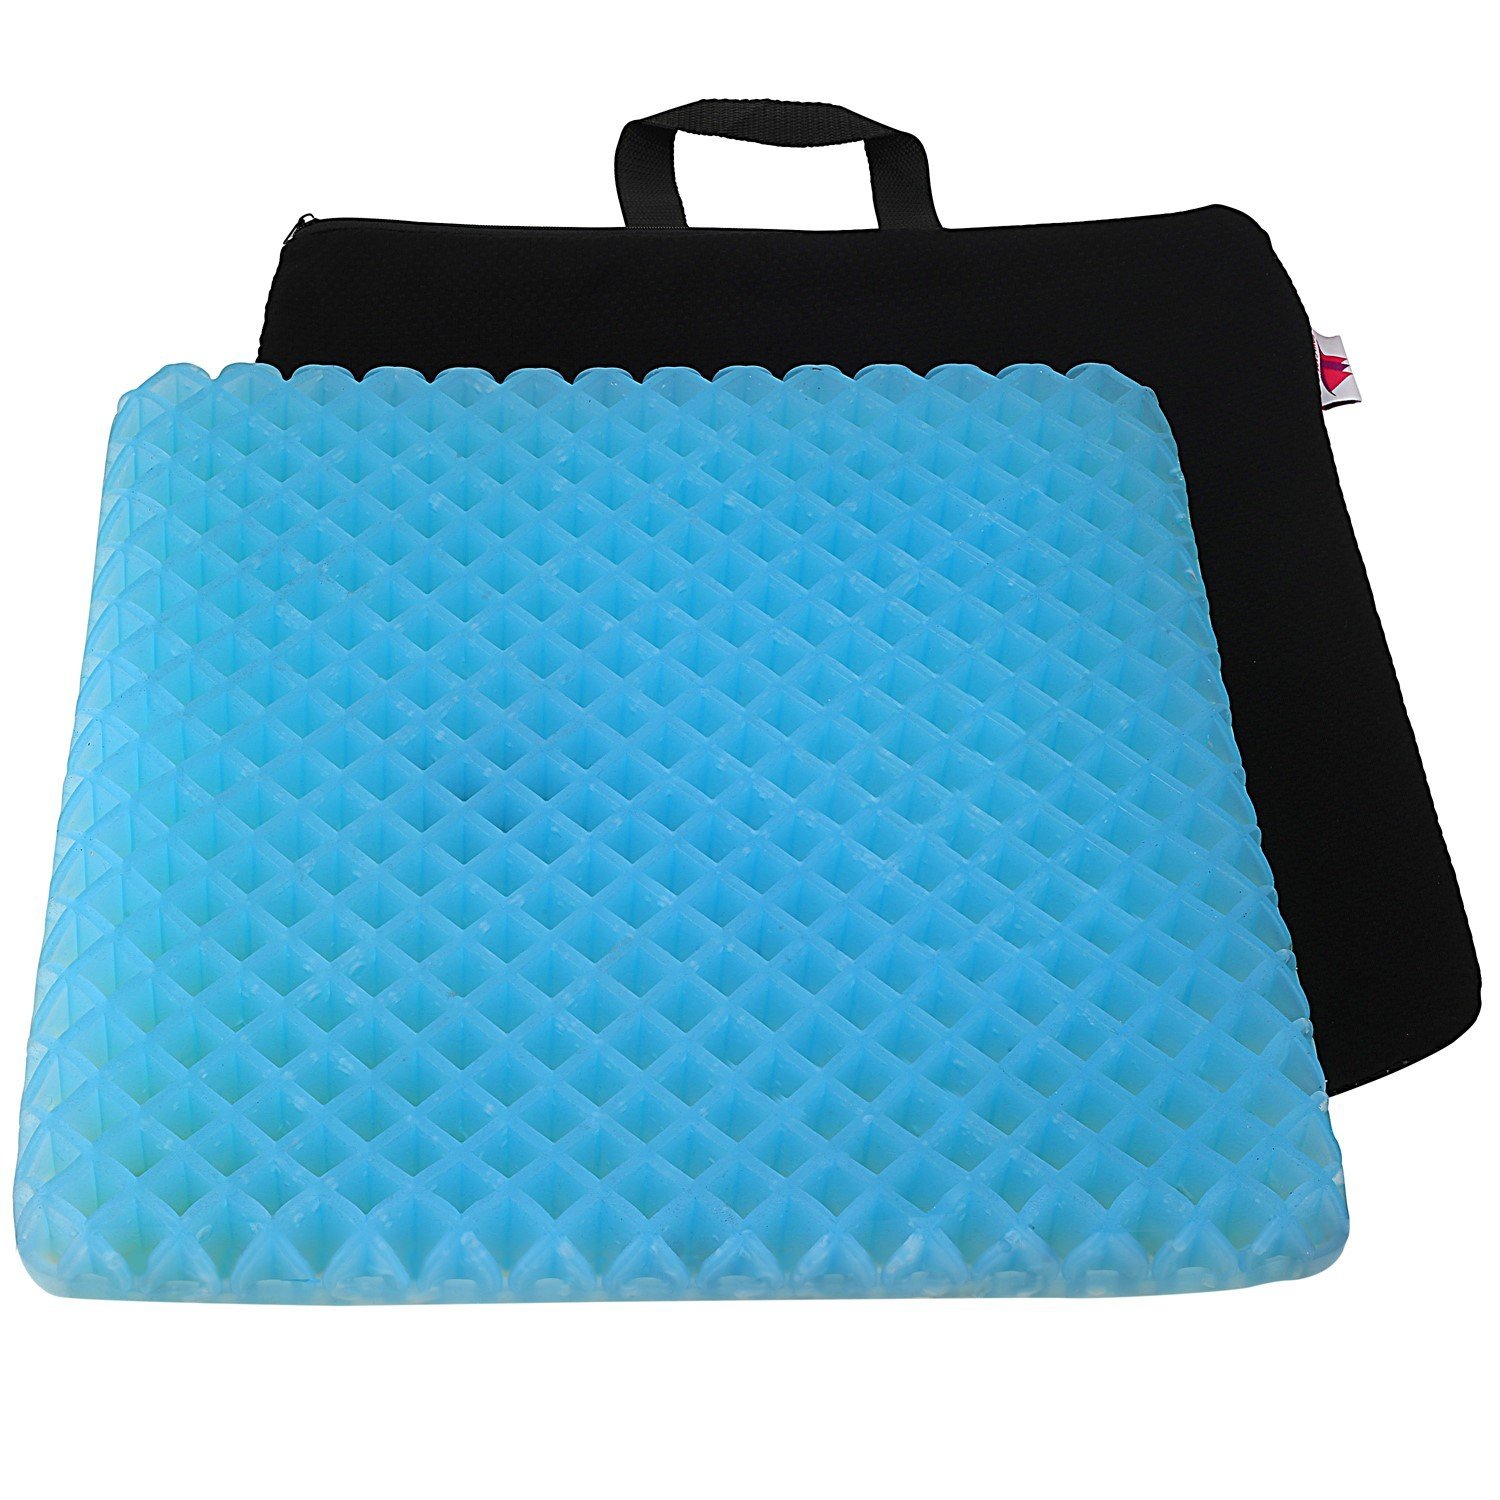 Remedic Gel Seat Cushion with Incontinence Pad